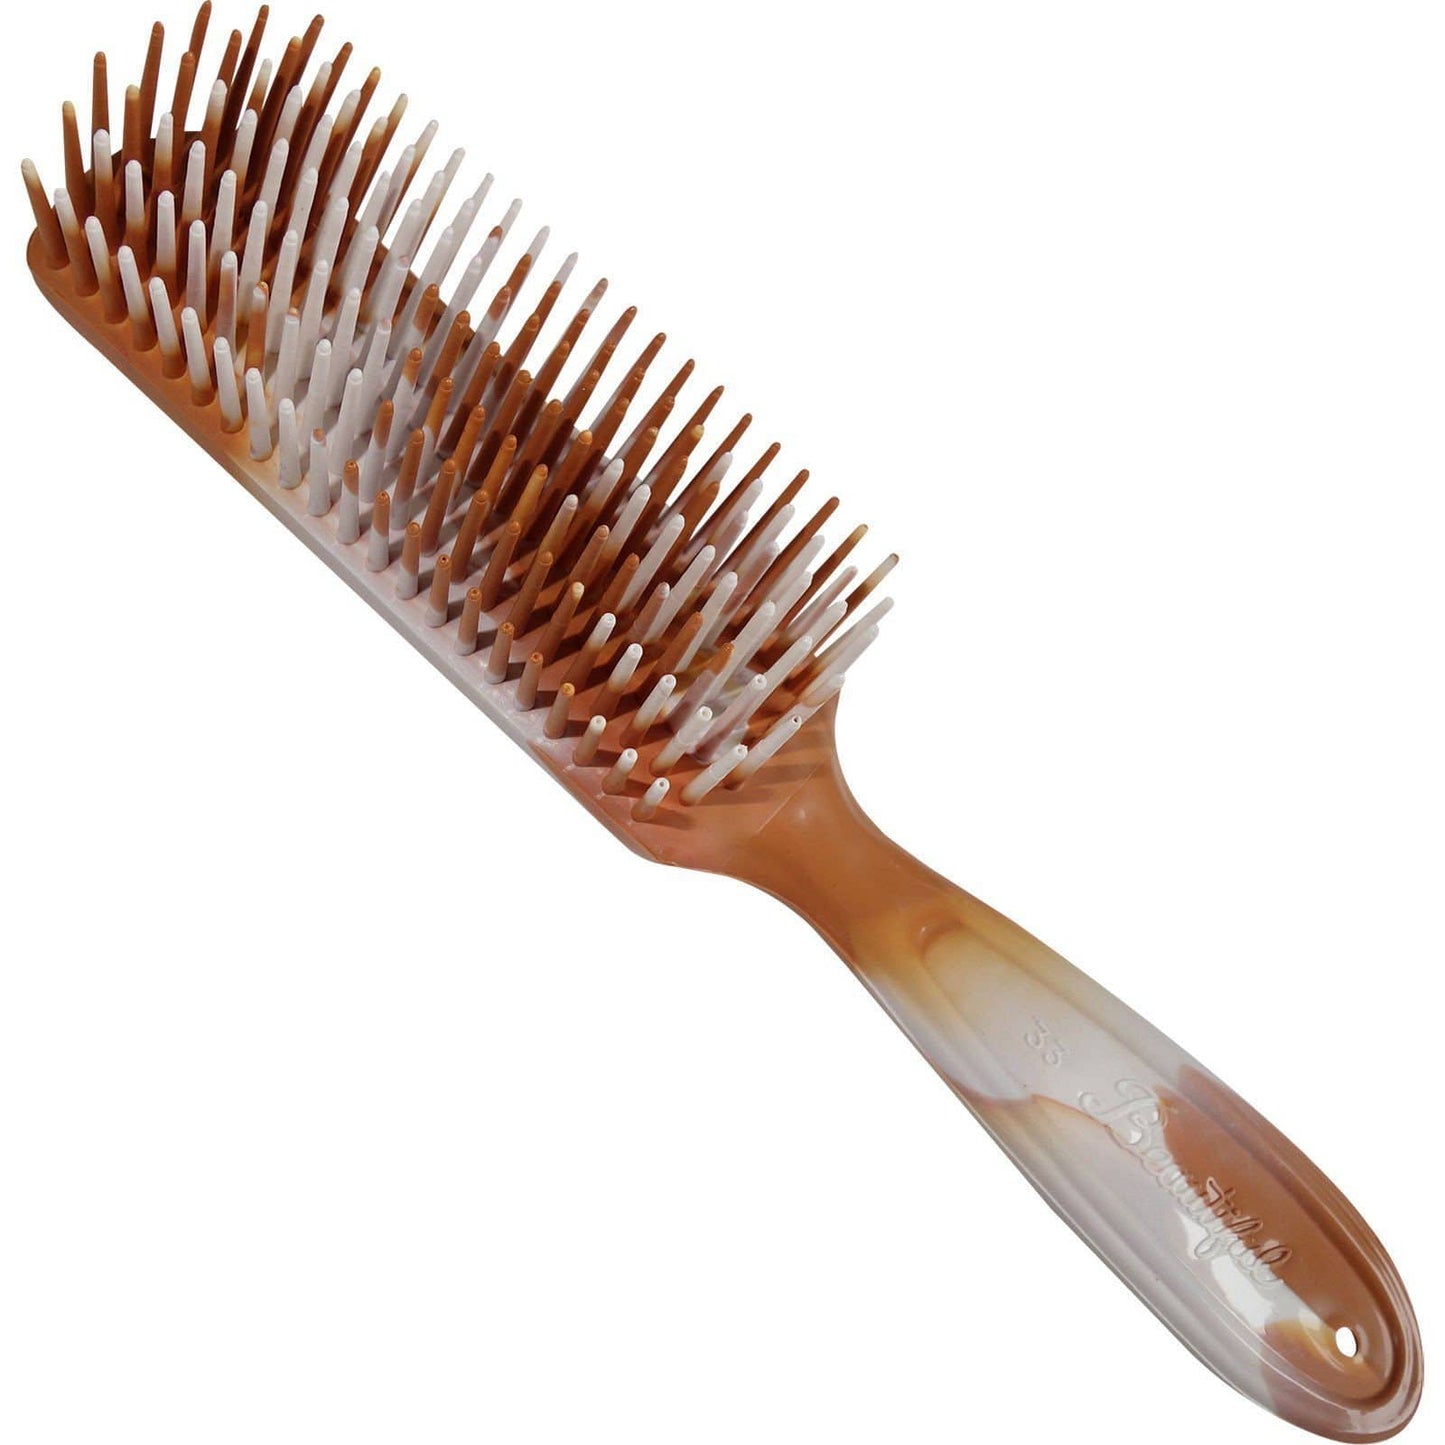 Brown Detangling Frizzy Curly Hair Brushes Hairdressing Salon Barber Combs